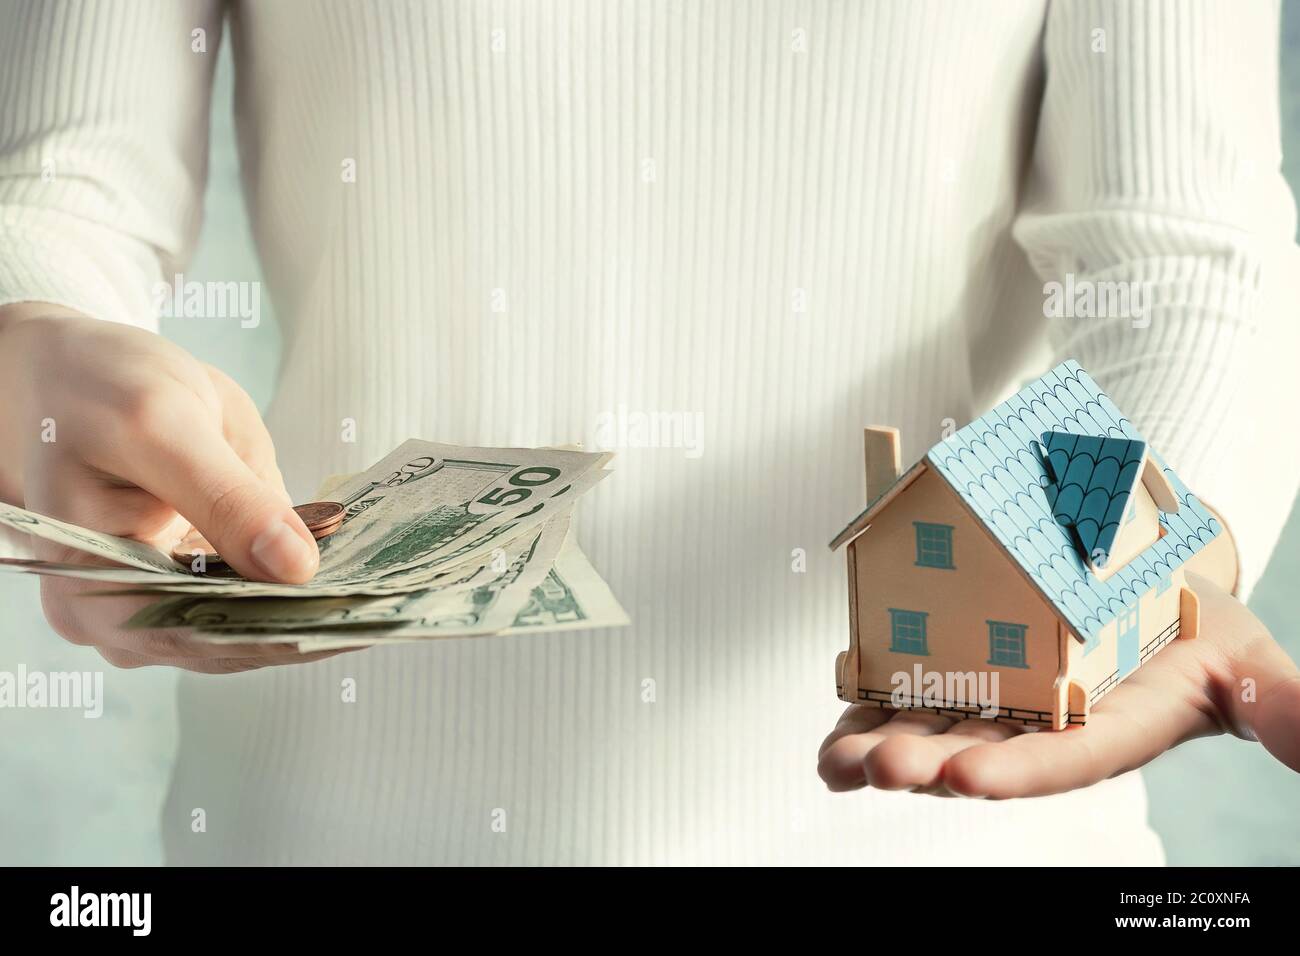 Real estate price and construction concept. Girl weighs money and a toy house in her hands. Stock Photo